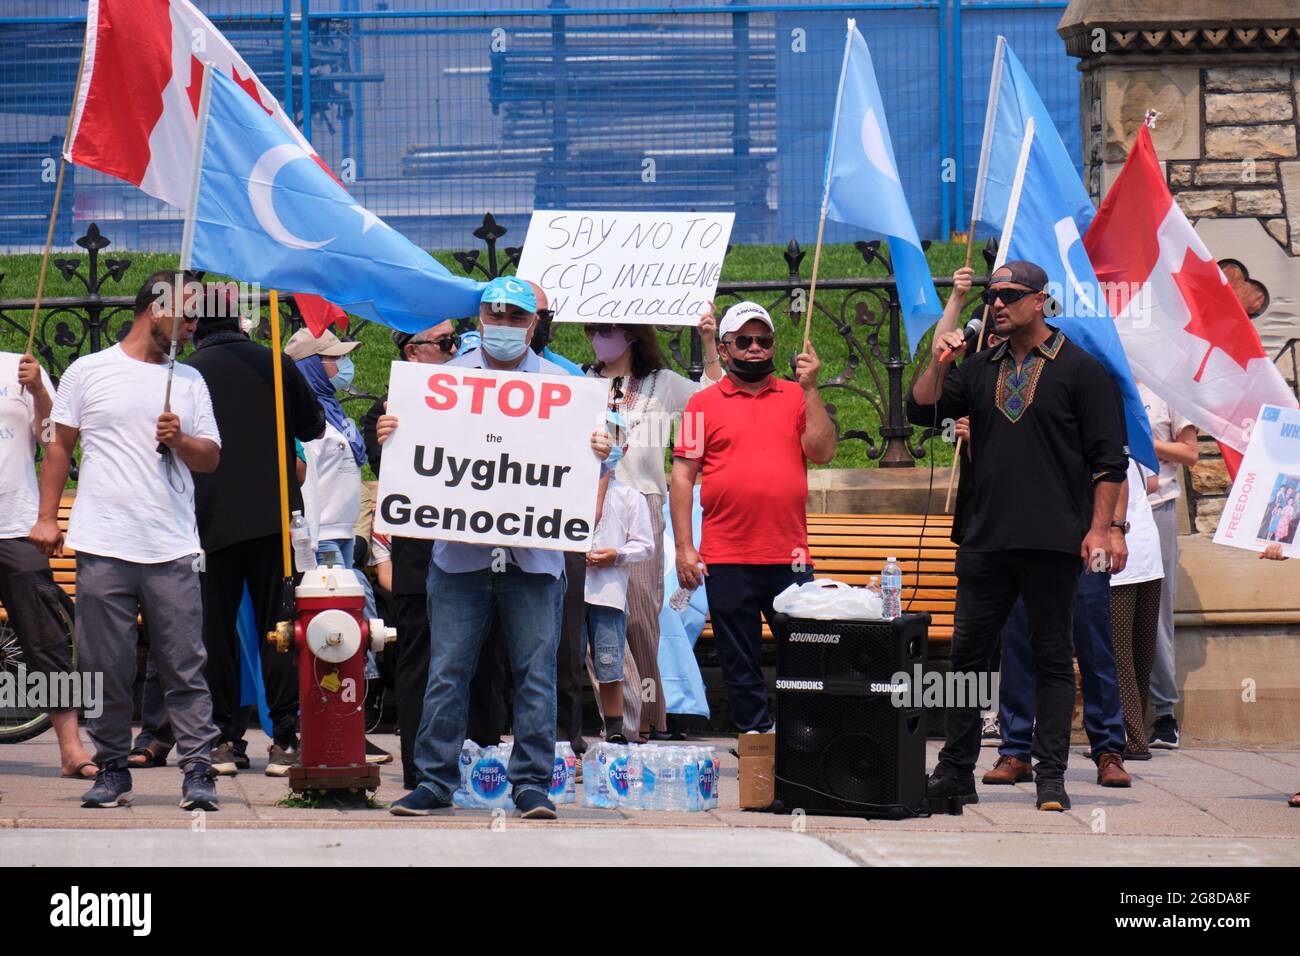 Ottawa, Canada. July 19th, 2021. Protest against the ongoing Genocide of Uyghur Muslims at the hand of the current Chinese regime in front of the Canadian Parliament. Calls for concrete actions from the government of Canada and a boycott of 2022 Winter Olympics in Beijing. Credit: meanderingemu/Alamy Live News Stock Photo